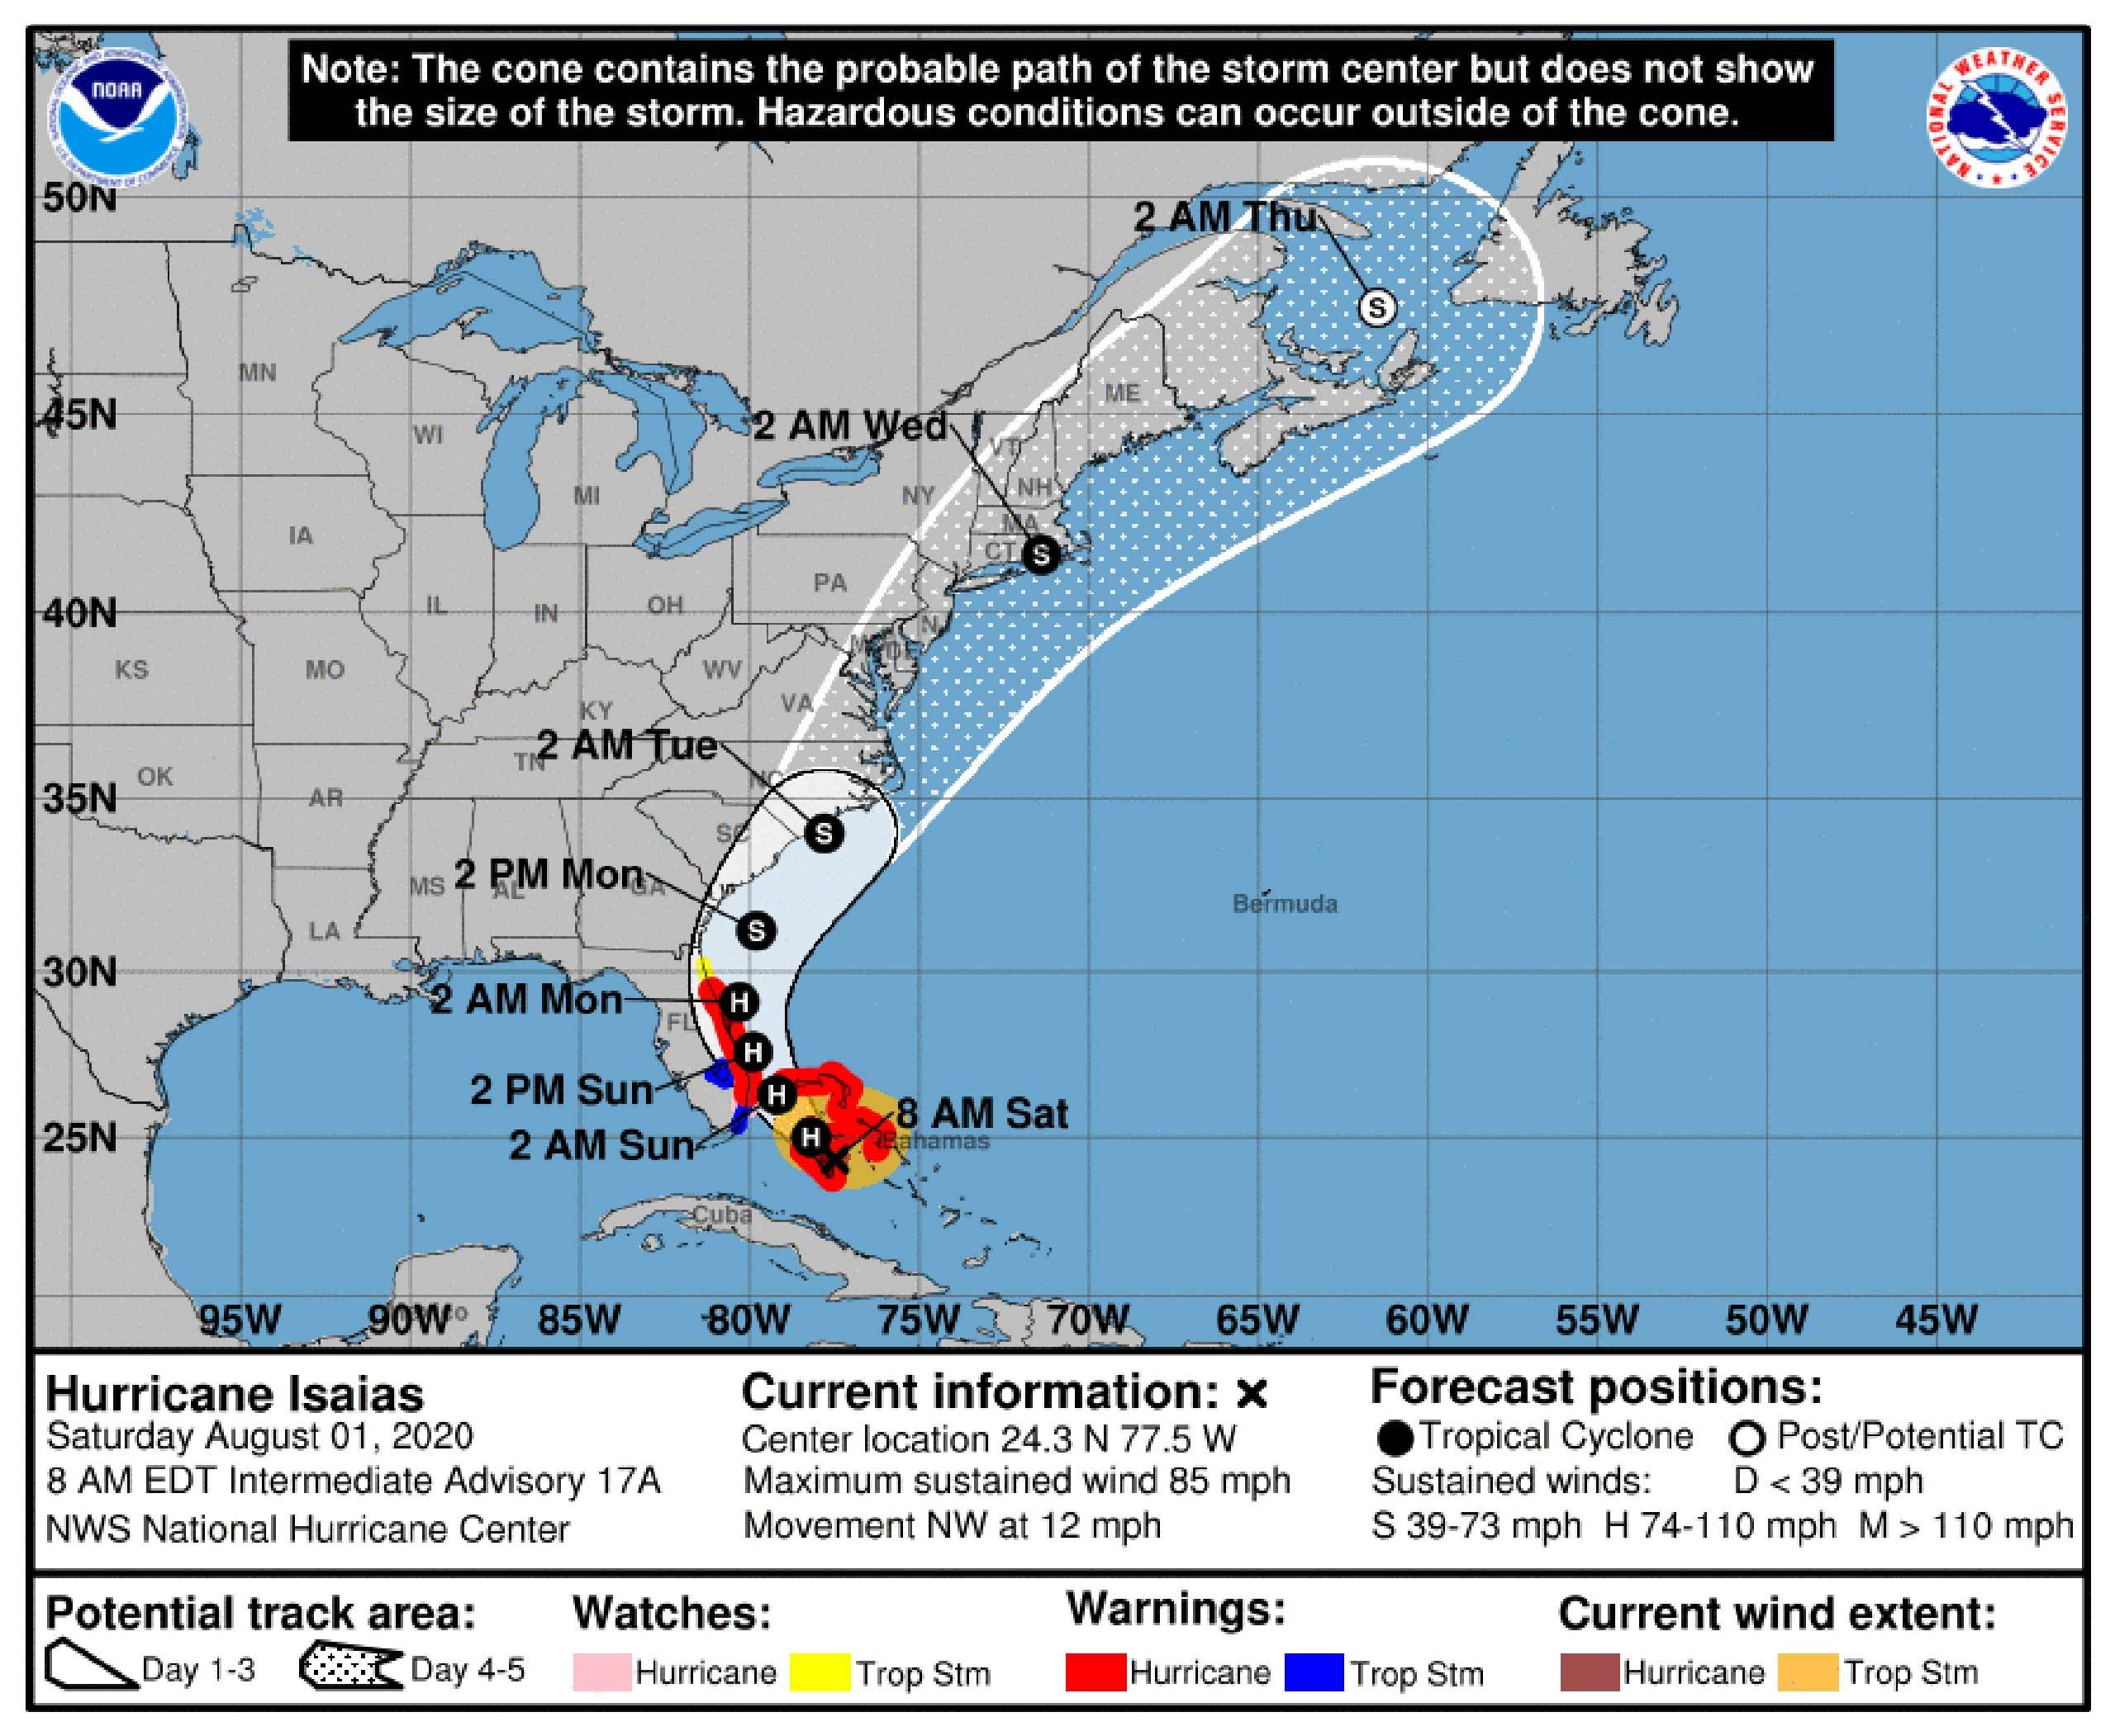 Walt Disney World remains under a Tropical Storm Warning as Hurricane Isaias approaches